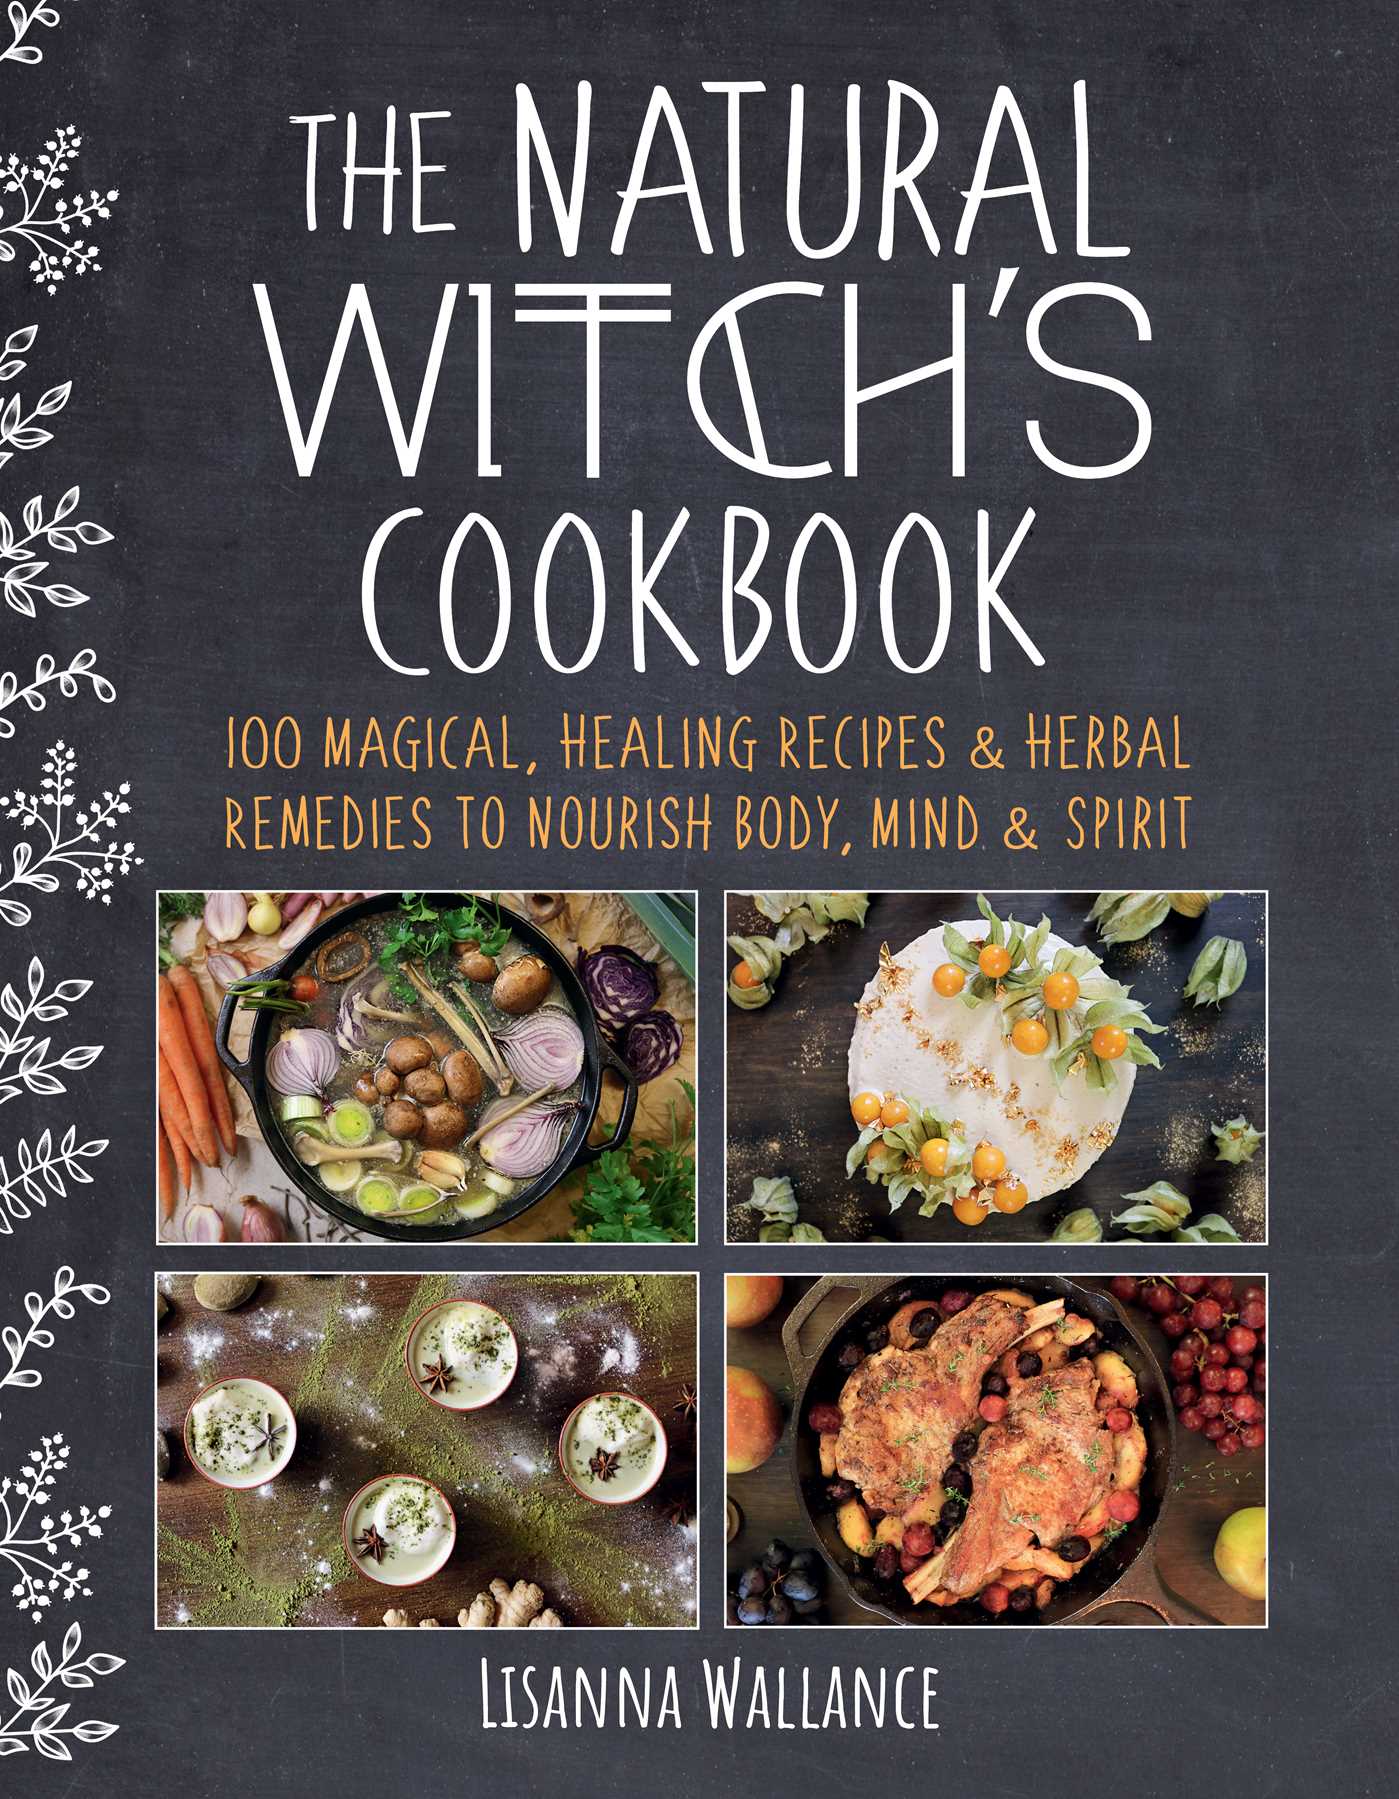 The Natural Witch's Cookbook